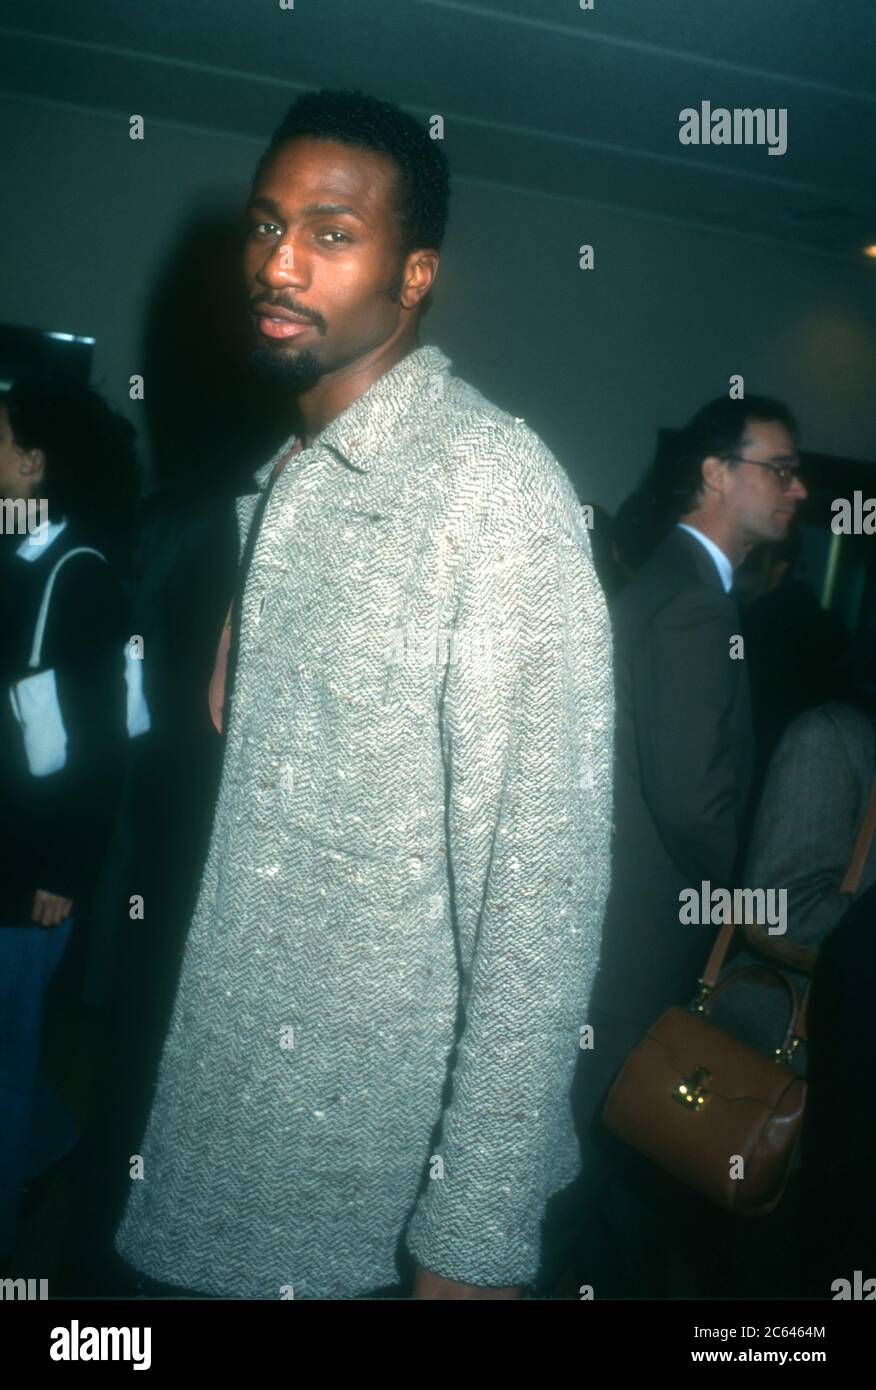 Westwood, California, USA 13th December 1995 Actor Leon Robinson attends Universal Pictures' '12 Monkeys' Premiere on December 13, 1995 at Mann Bruin Theatre in Westwood, California, USA. Photo by Barry King/Alamy Stock Photo Stock Photo